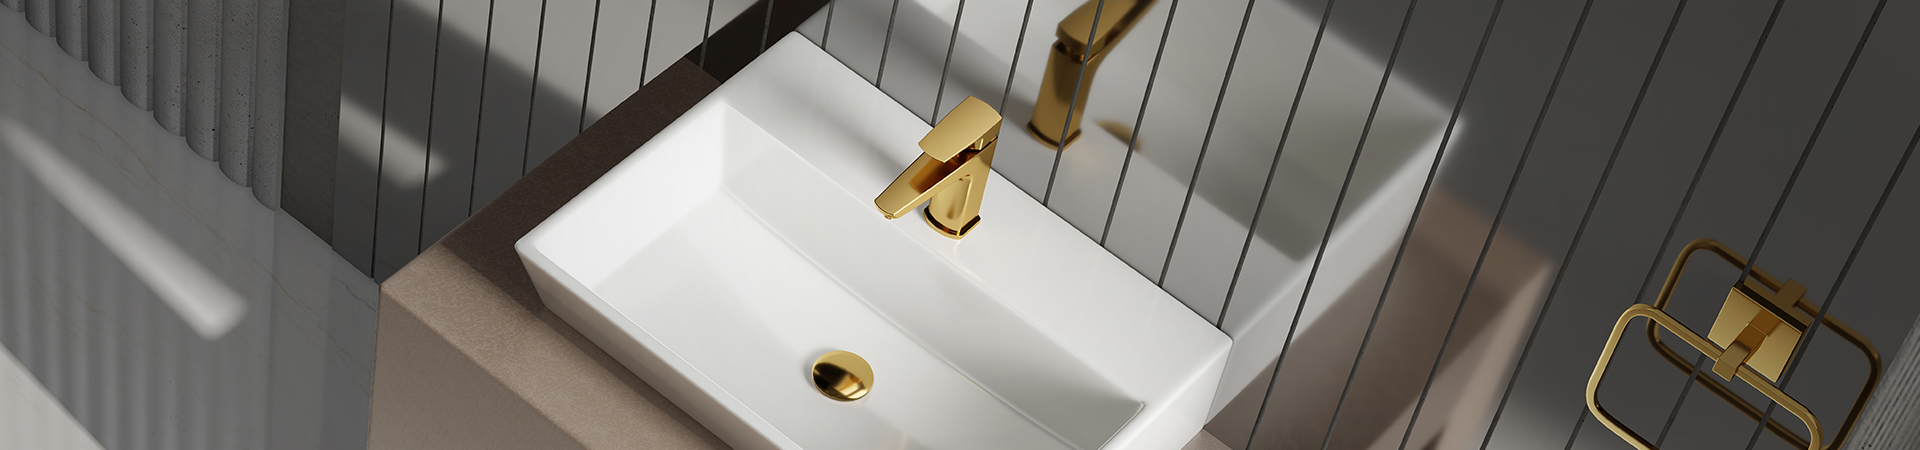 0043652_Faucets-Cubism_RIGHT_01-1920x450